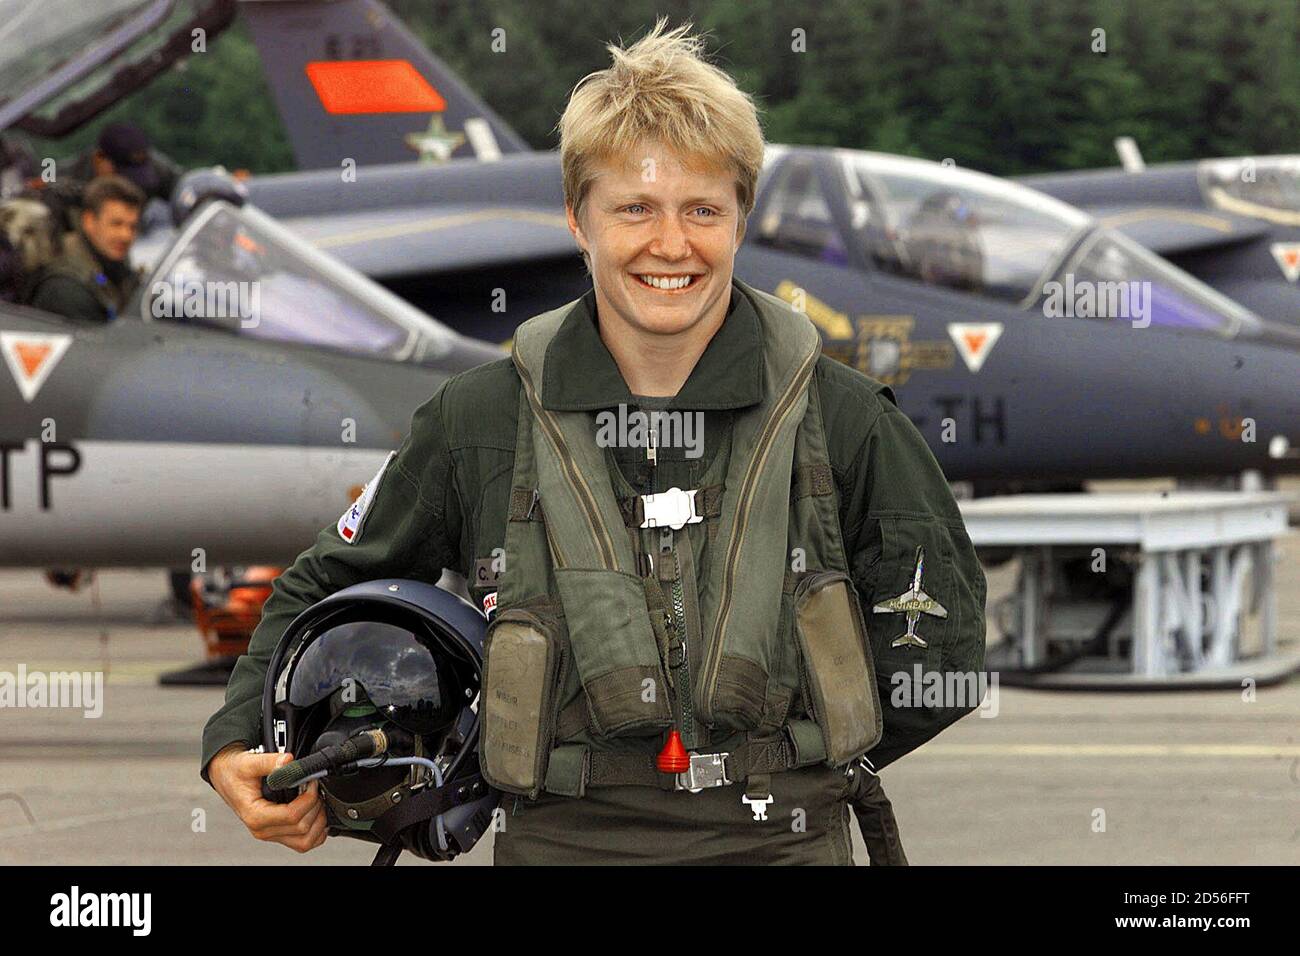 Lieutenant Caroline Aigle, 24, France's first woman fighter pilot seen in  her flying gear May 25, at the Tours fighter pilot training school a few  days before her graduation on May 28.